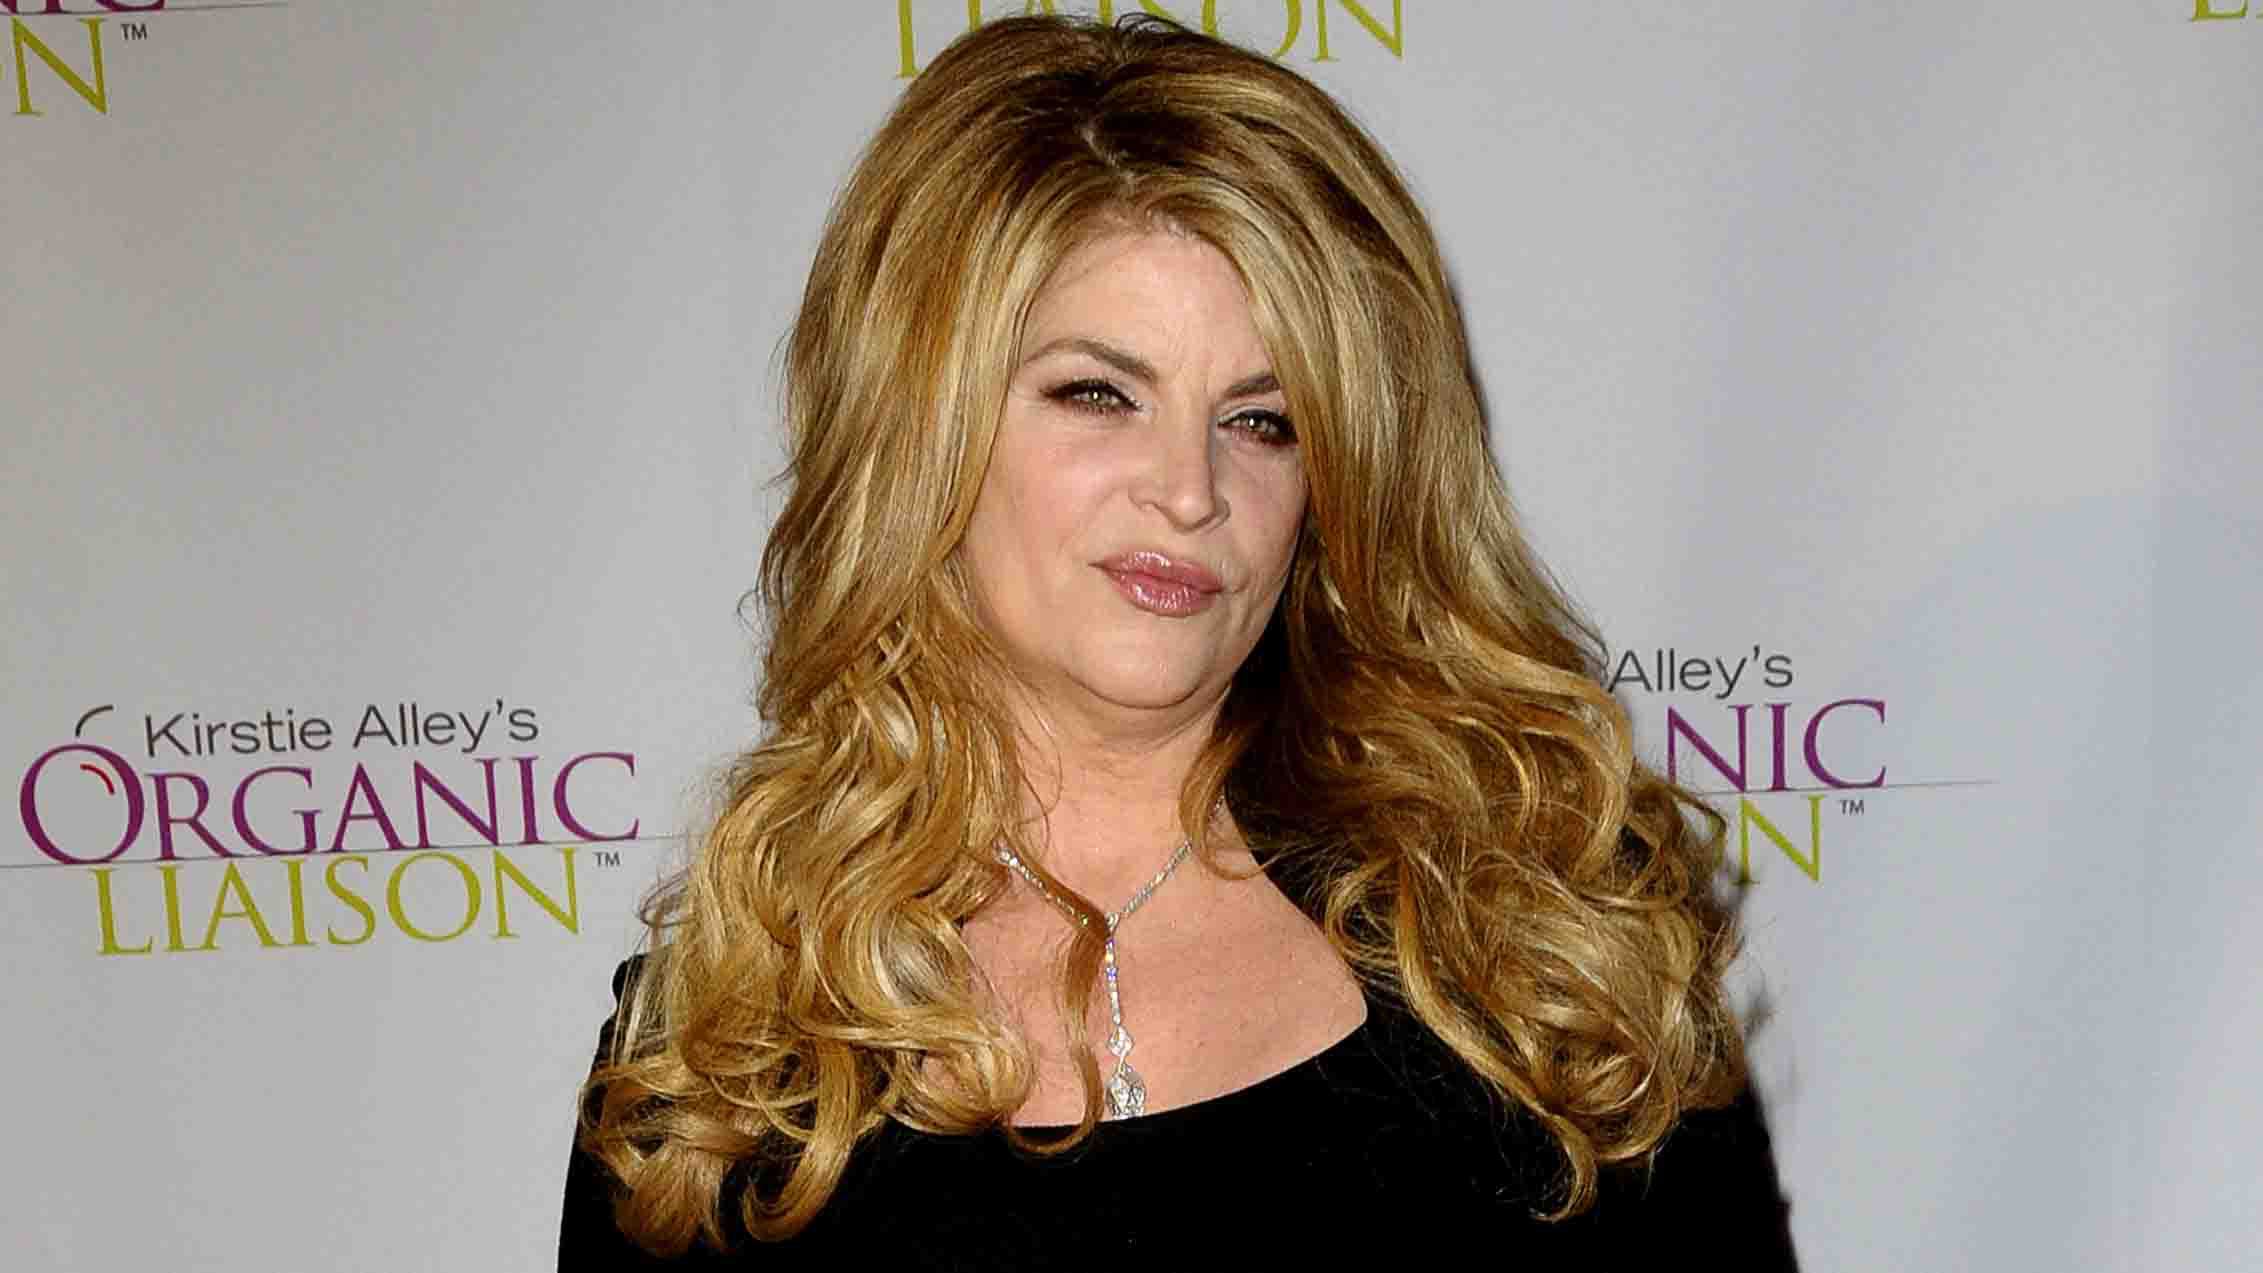 All Kirstie Alley wallpapers.